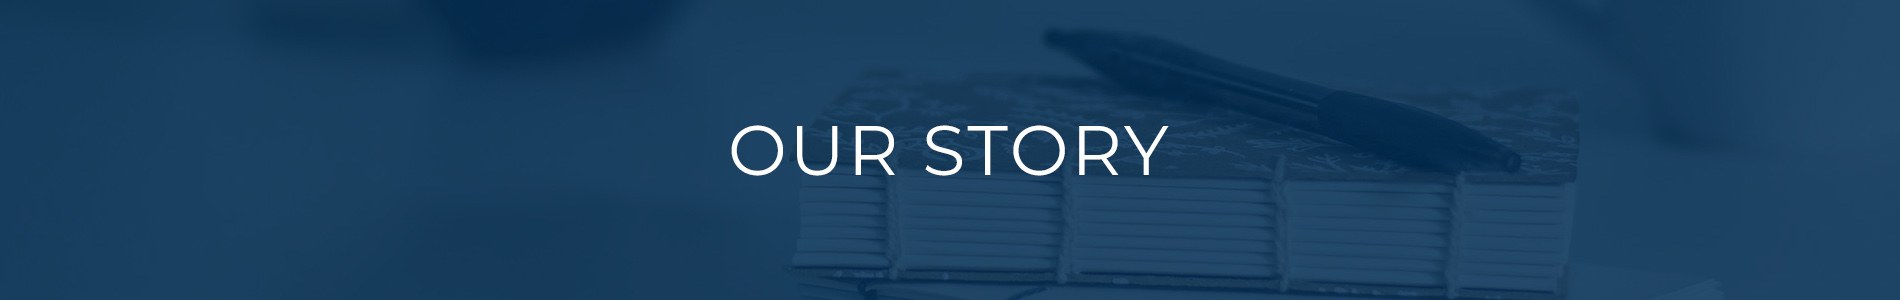 our-story-banner